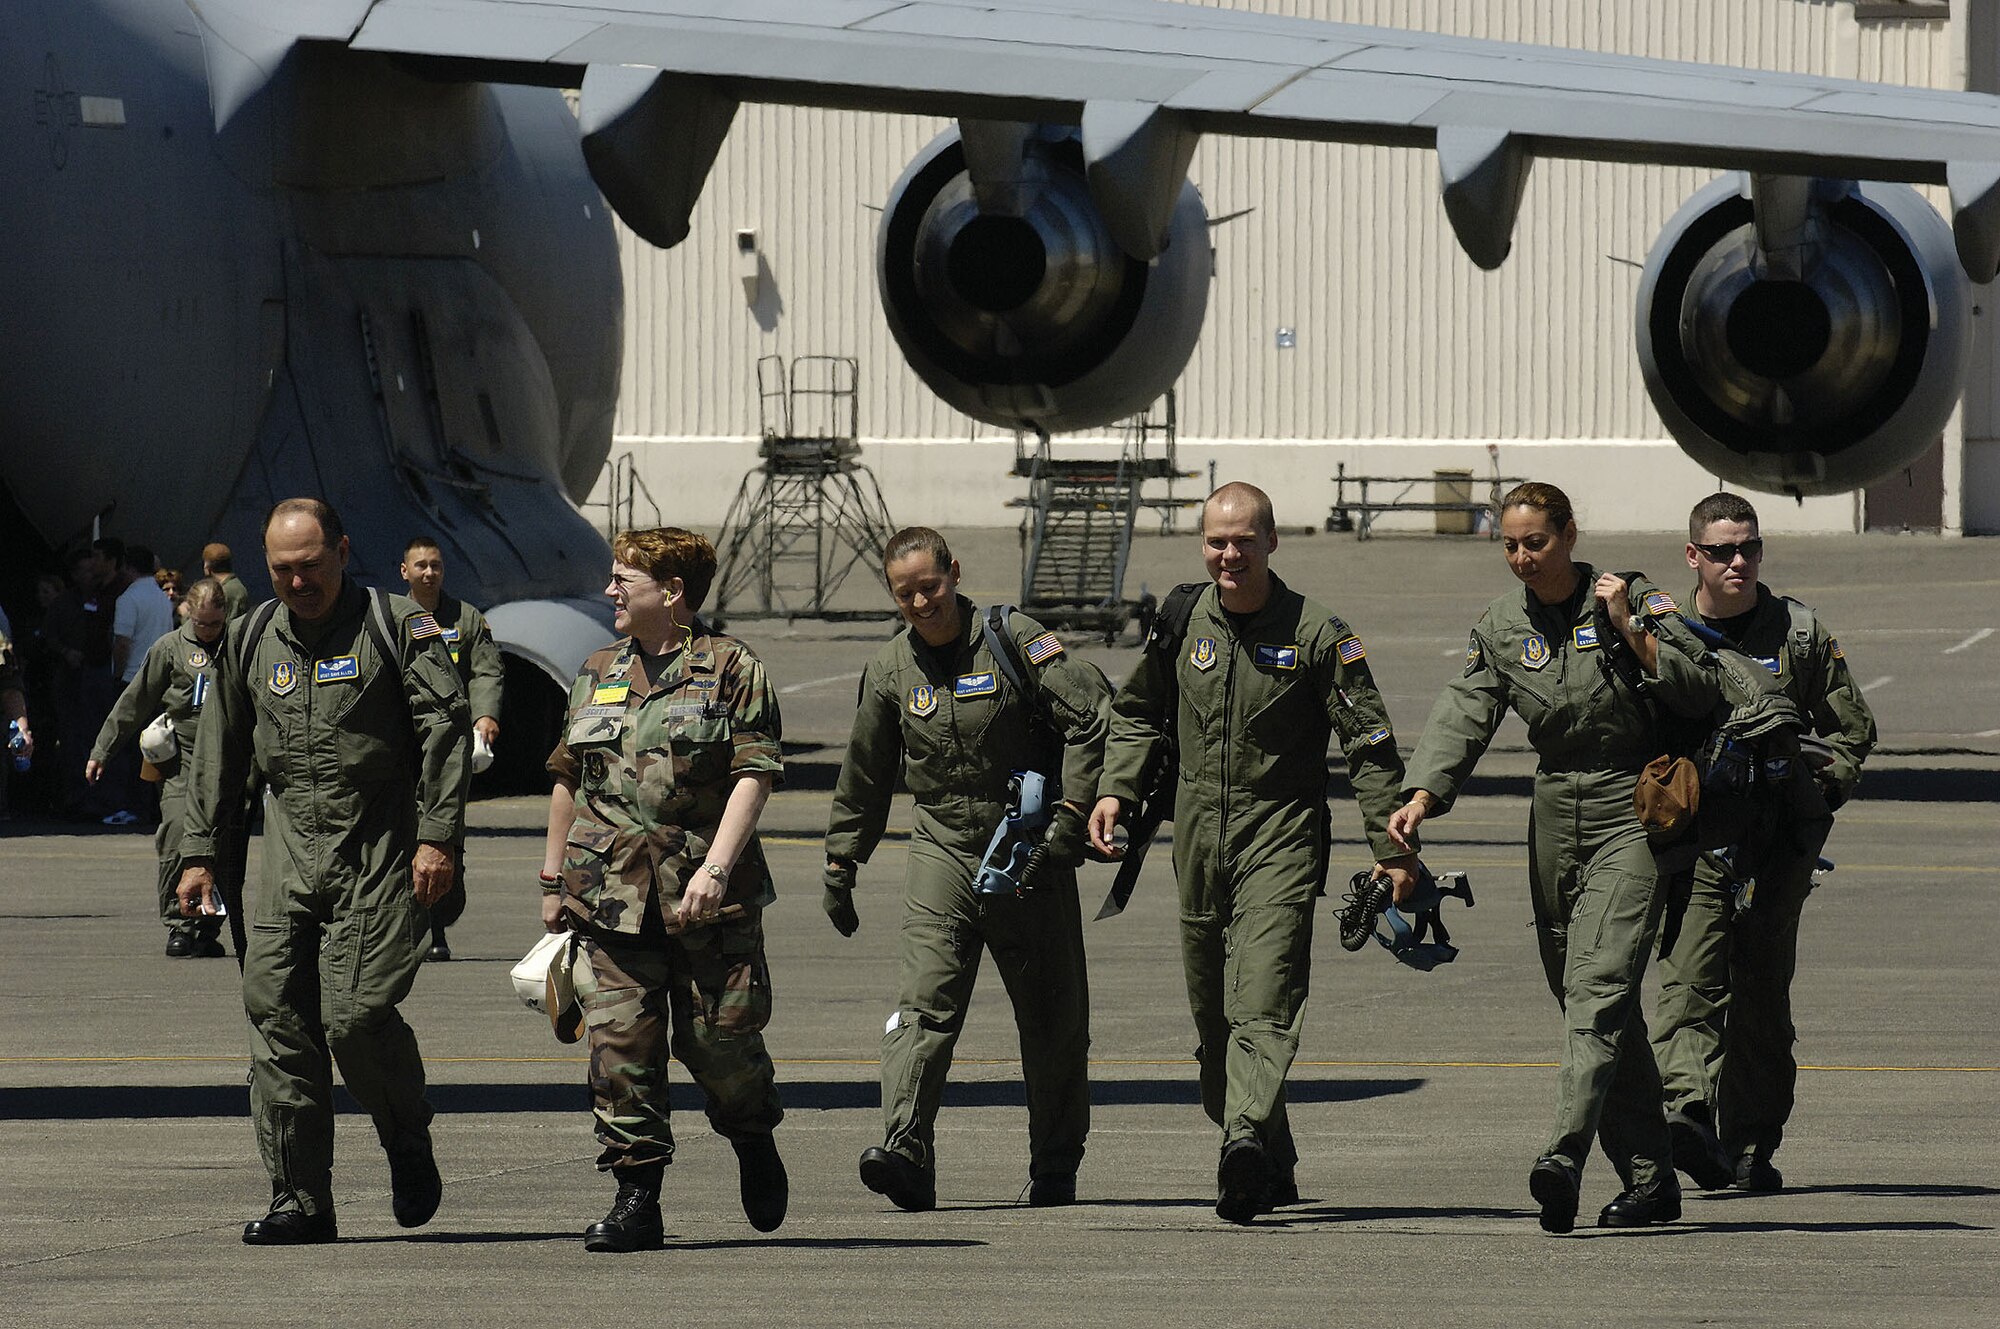 Reserve Airmen from the 446th Aeromedical Evacuation Squadron, McChord Air Force Base, Wash., exit a C-17 at the aeromedical evacuation static configuration event during Air Mobility Rodeo 2007, July 24. The event measured a team's ability to perform aeromedical evacuations in a KC-135 and a C-17. Air Mobility Command's Rodeo 2007 is a readiness competition of U.S. and international mobility air forces. It focuses on improving war fighting capabilities and support of the Global War on Terrorism.   (U. S. Air Force photo/Senior Airman Clay Lancaster)
